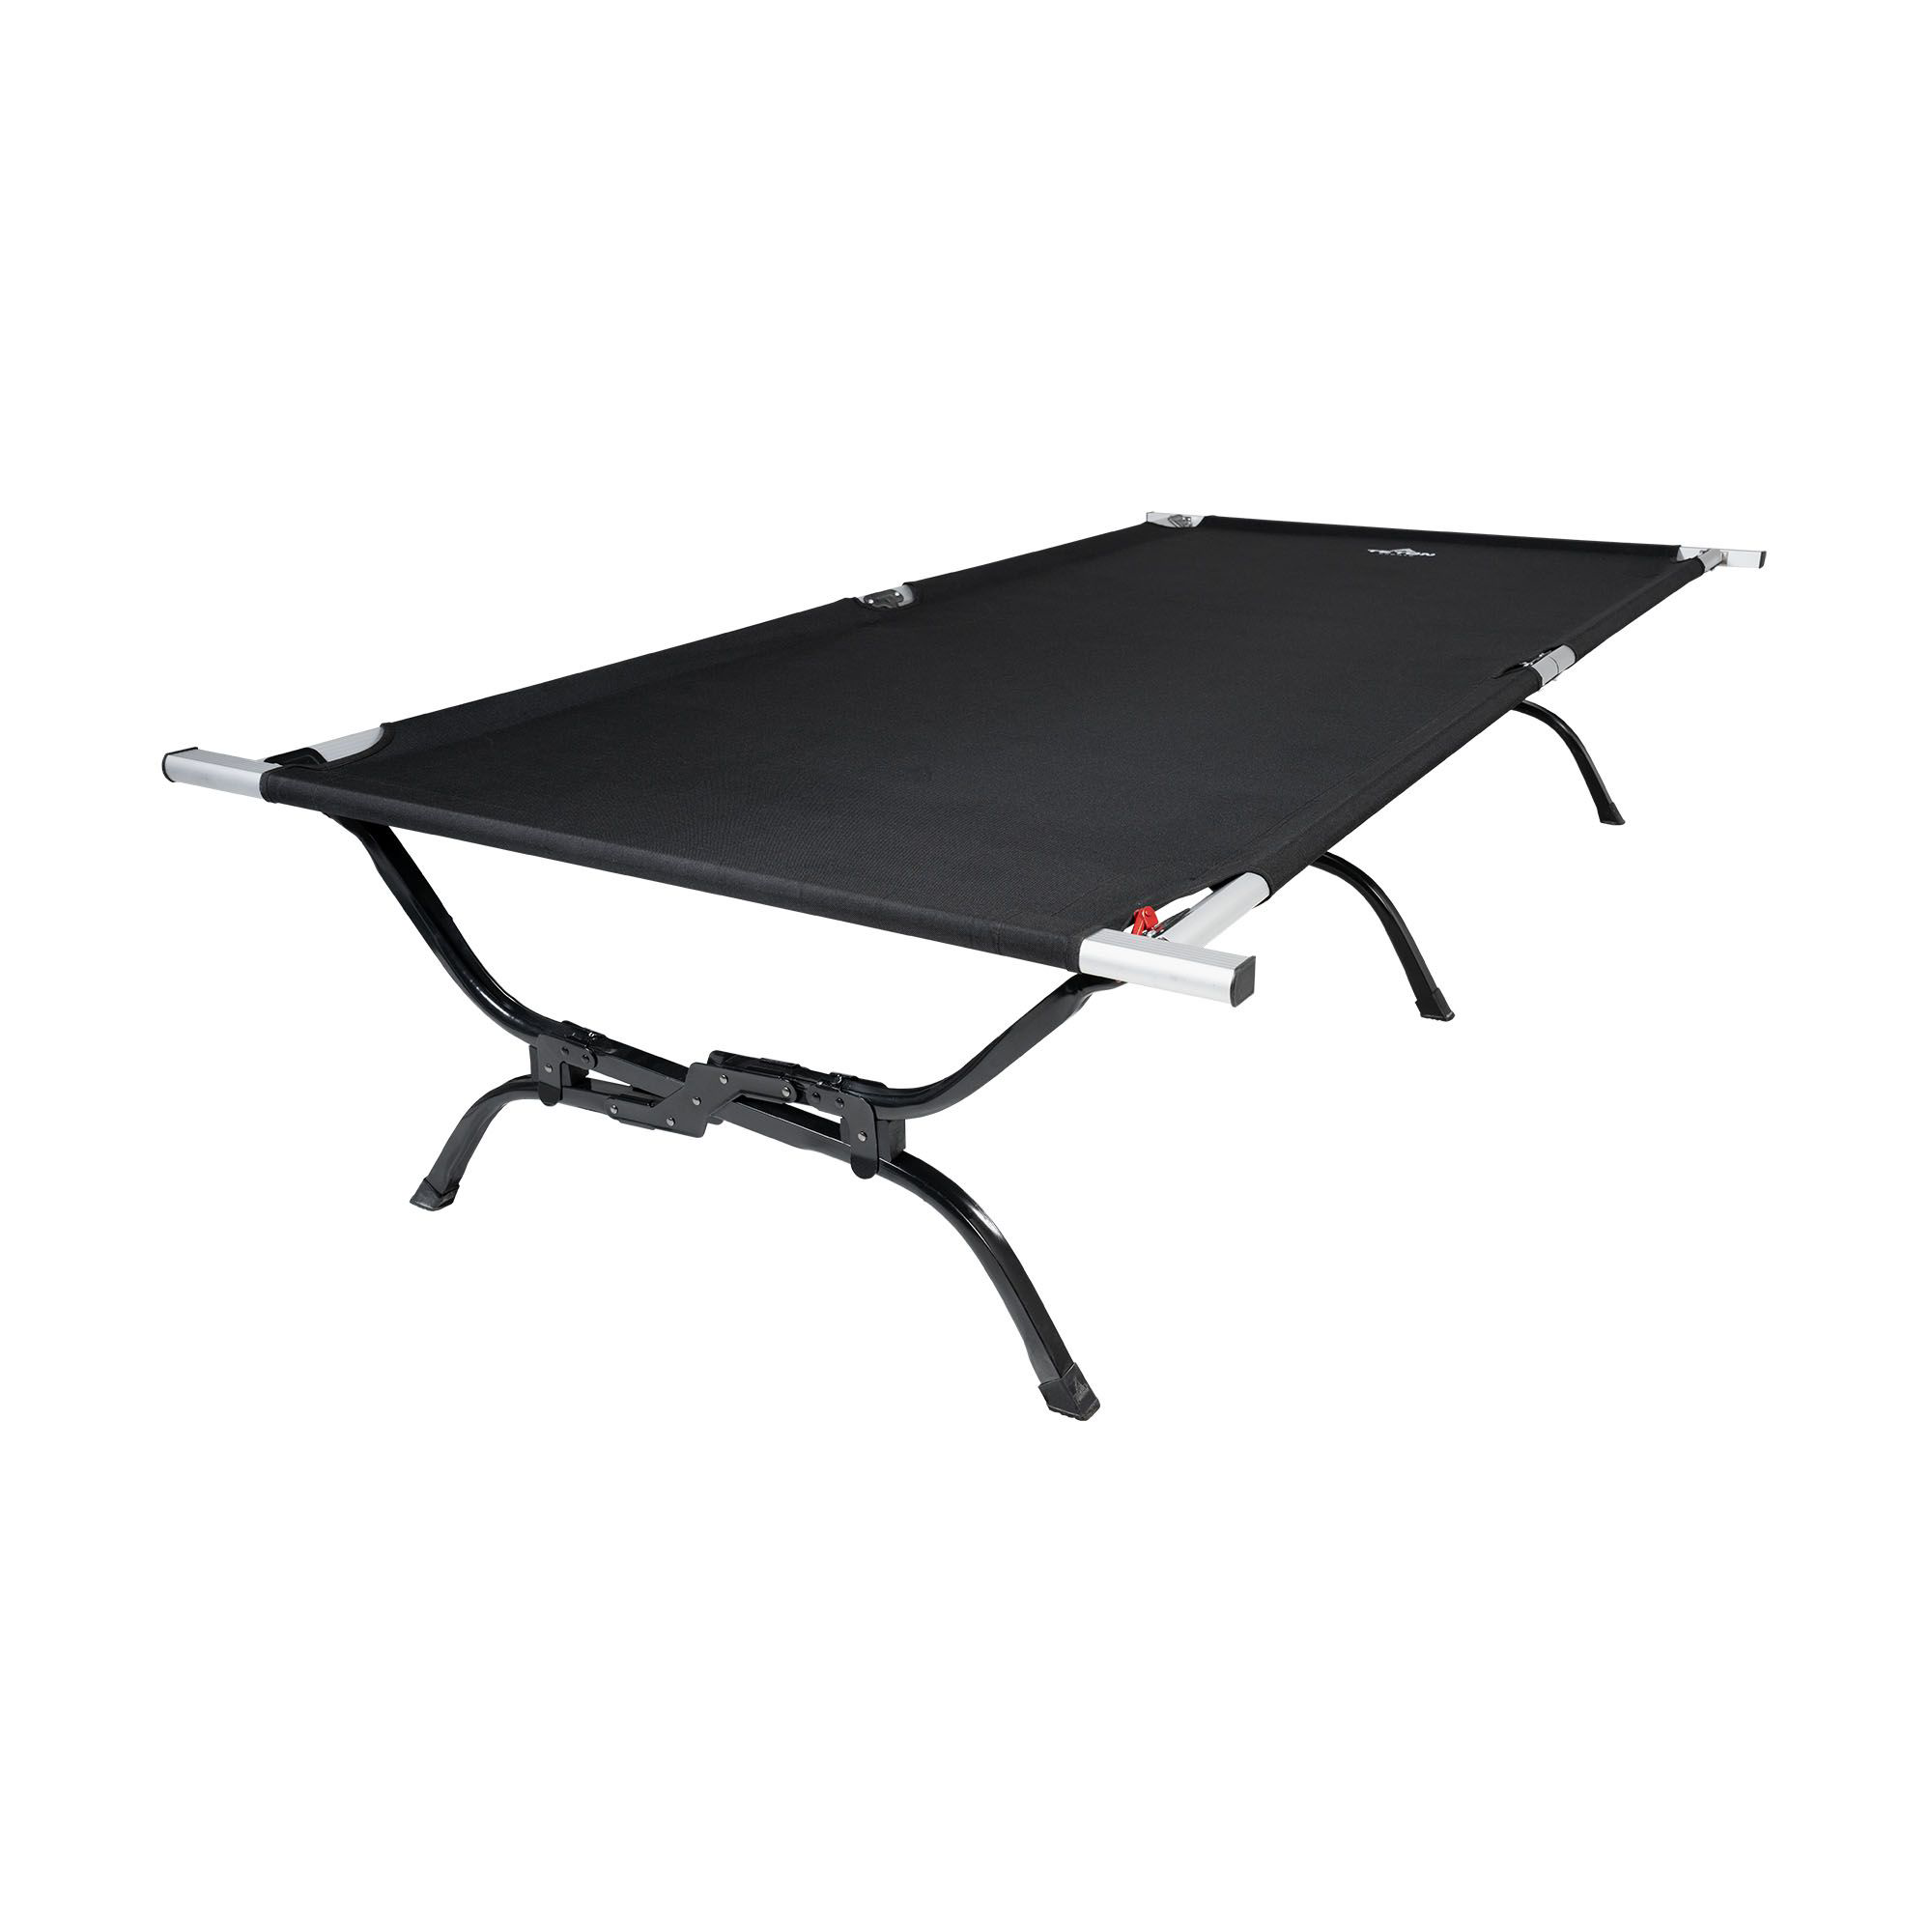 Teton Sports Outfitter XXL Camping Cot with Patented Pivot Arm